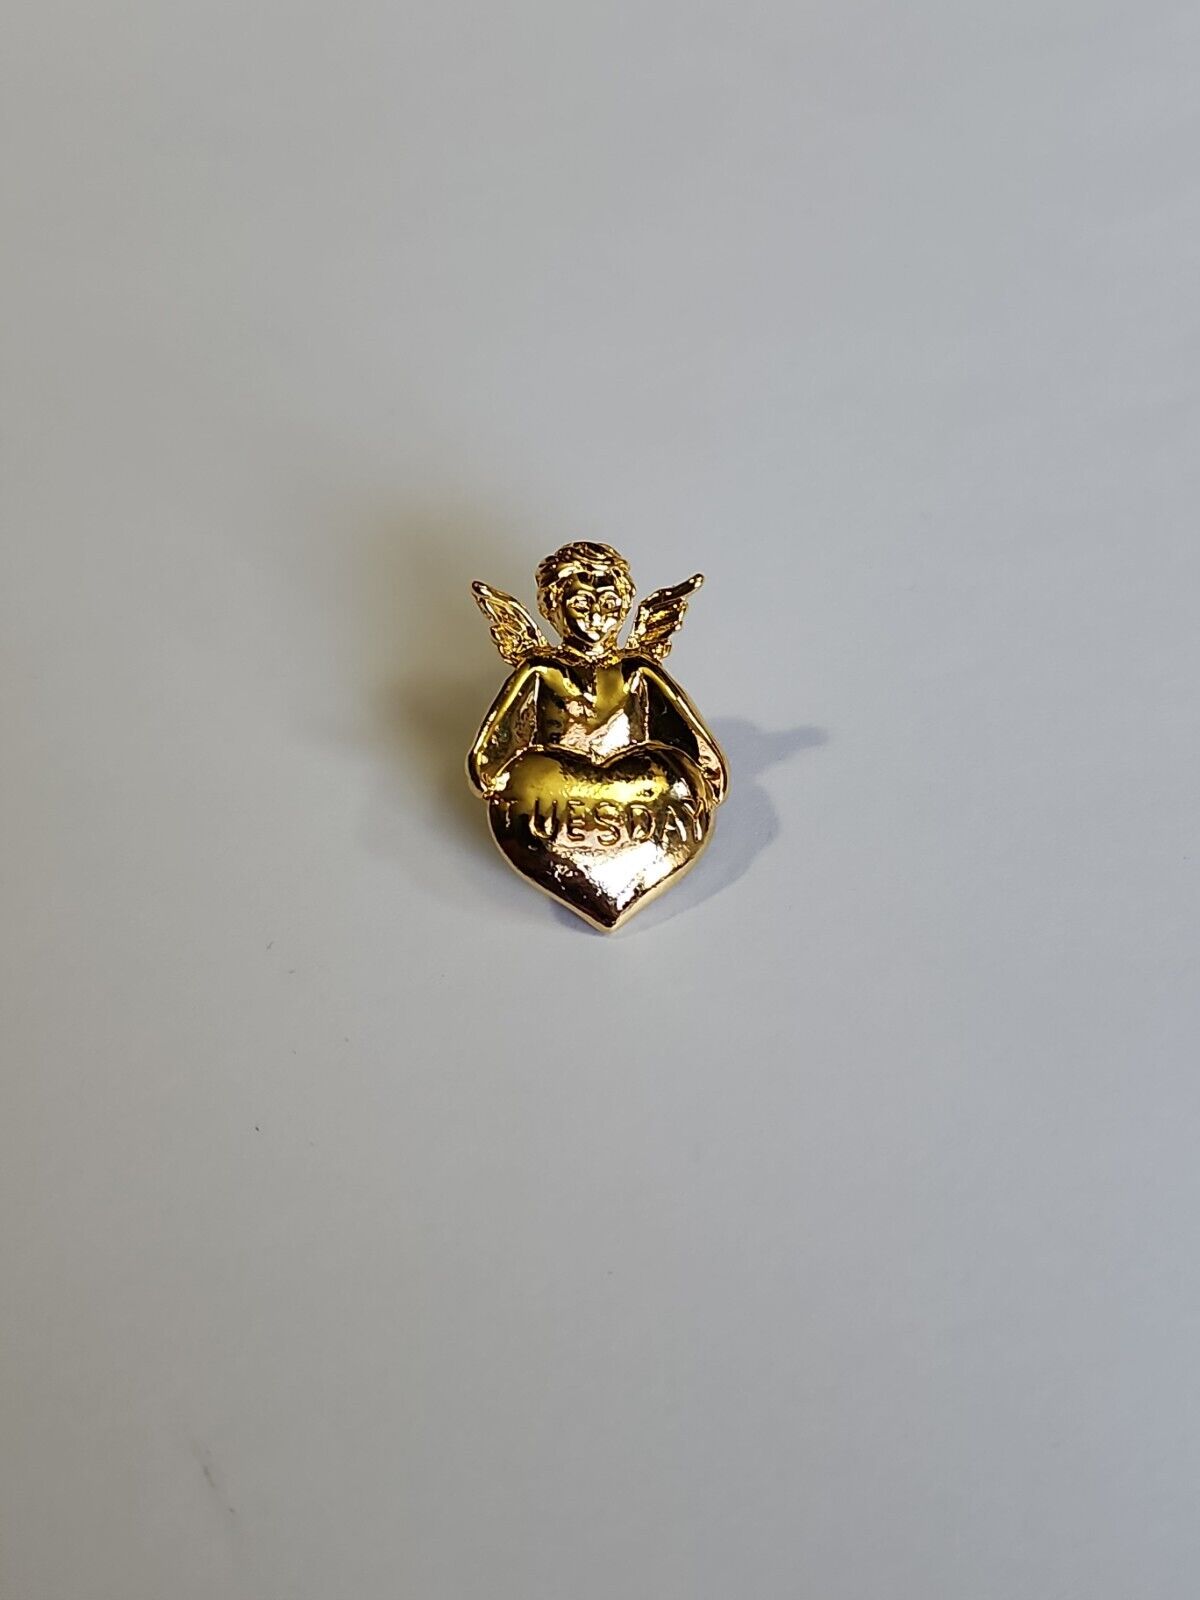 Tuesday Angel Cherub Lapel Pin Gold Color Metal by Two Sisters